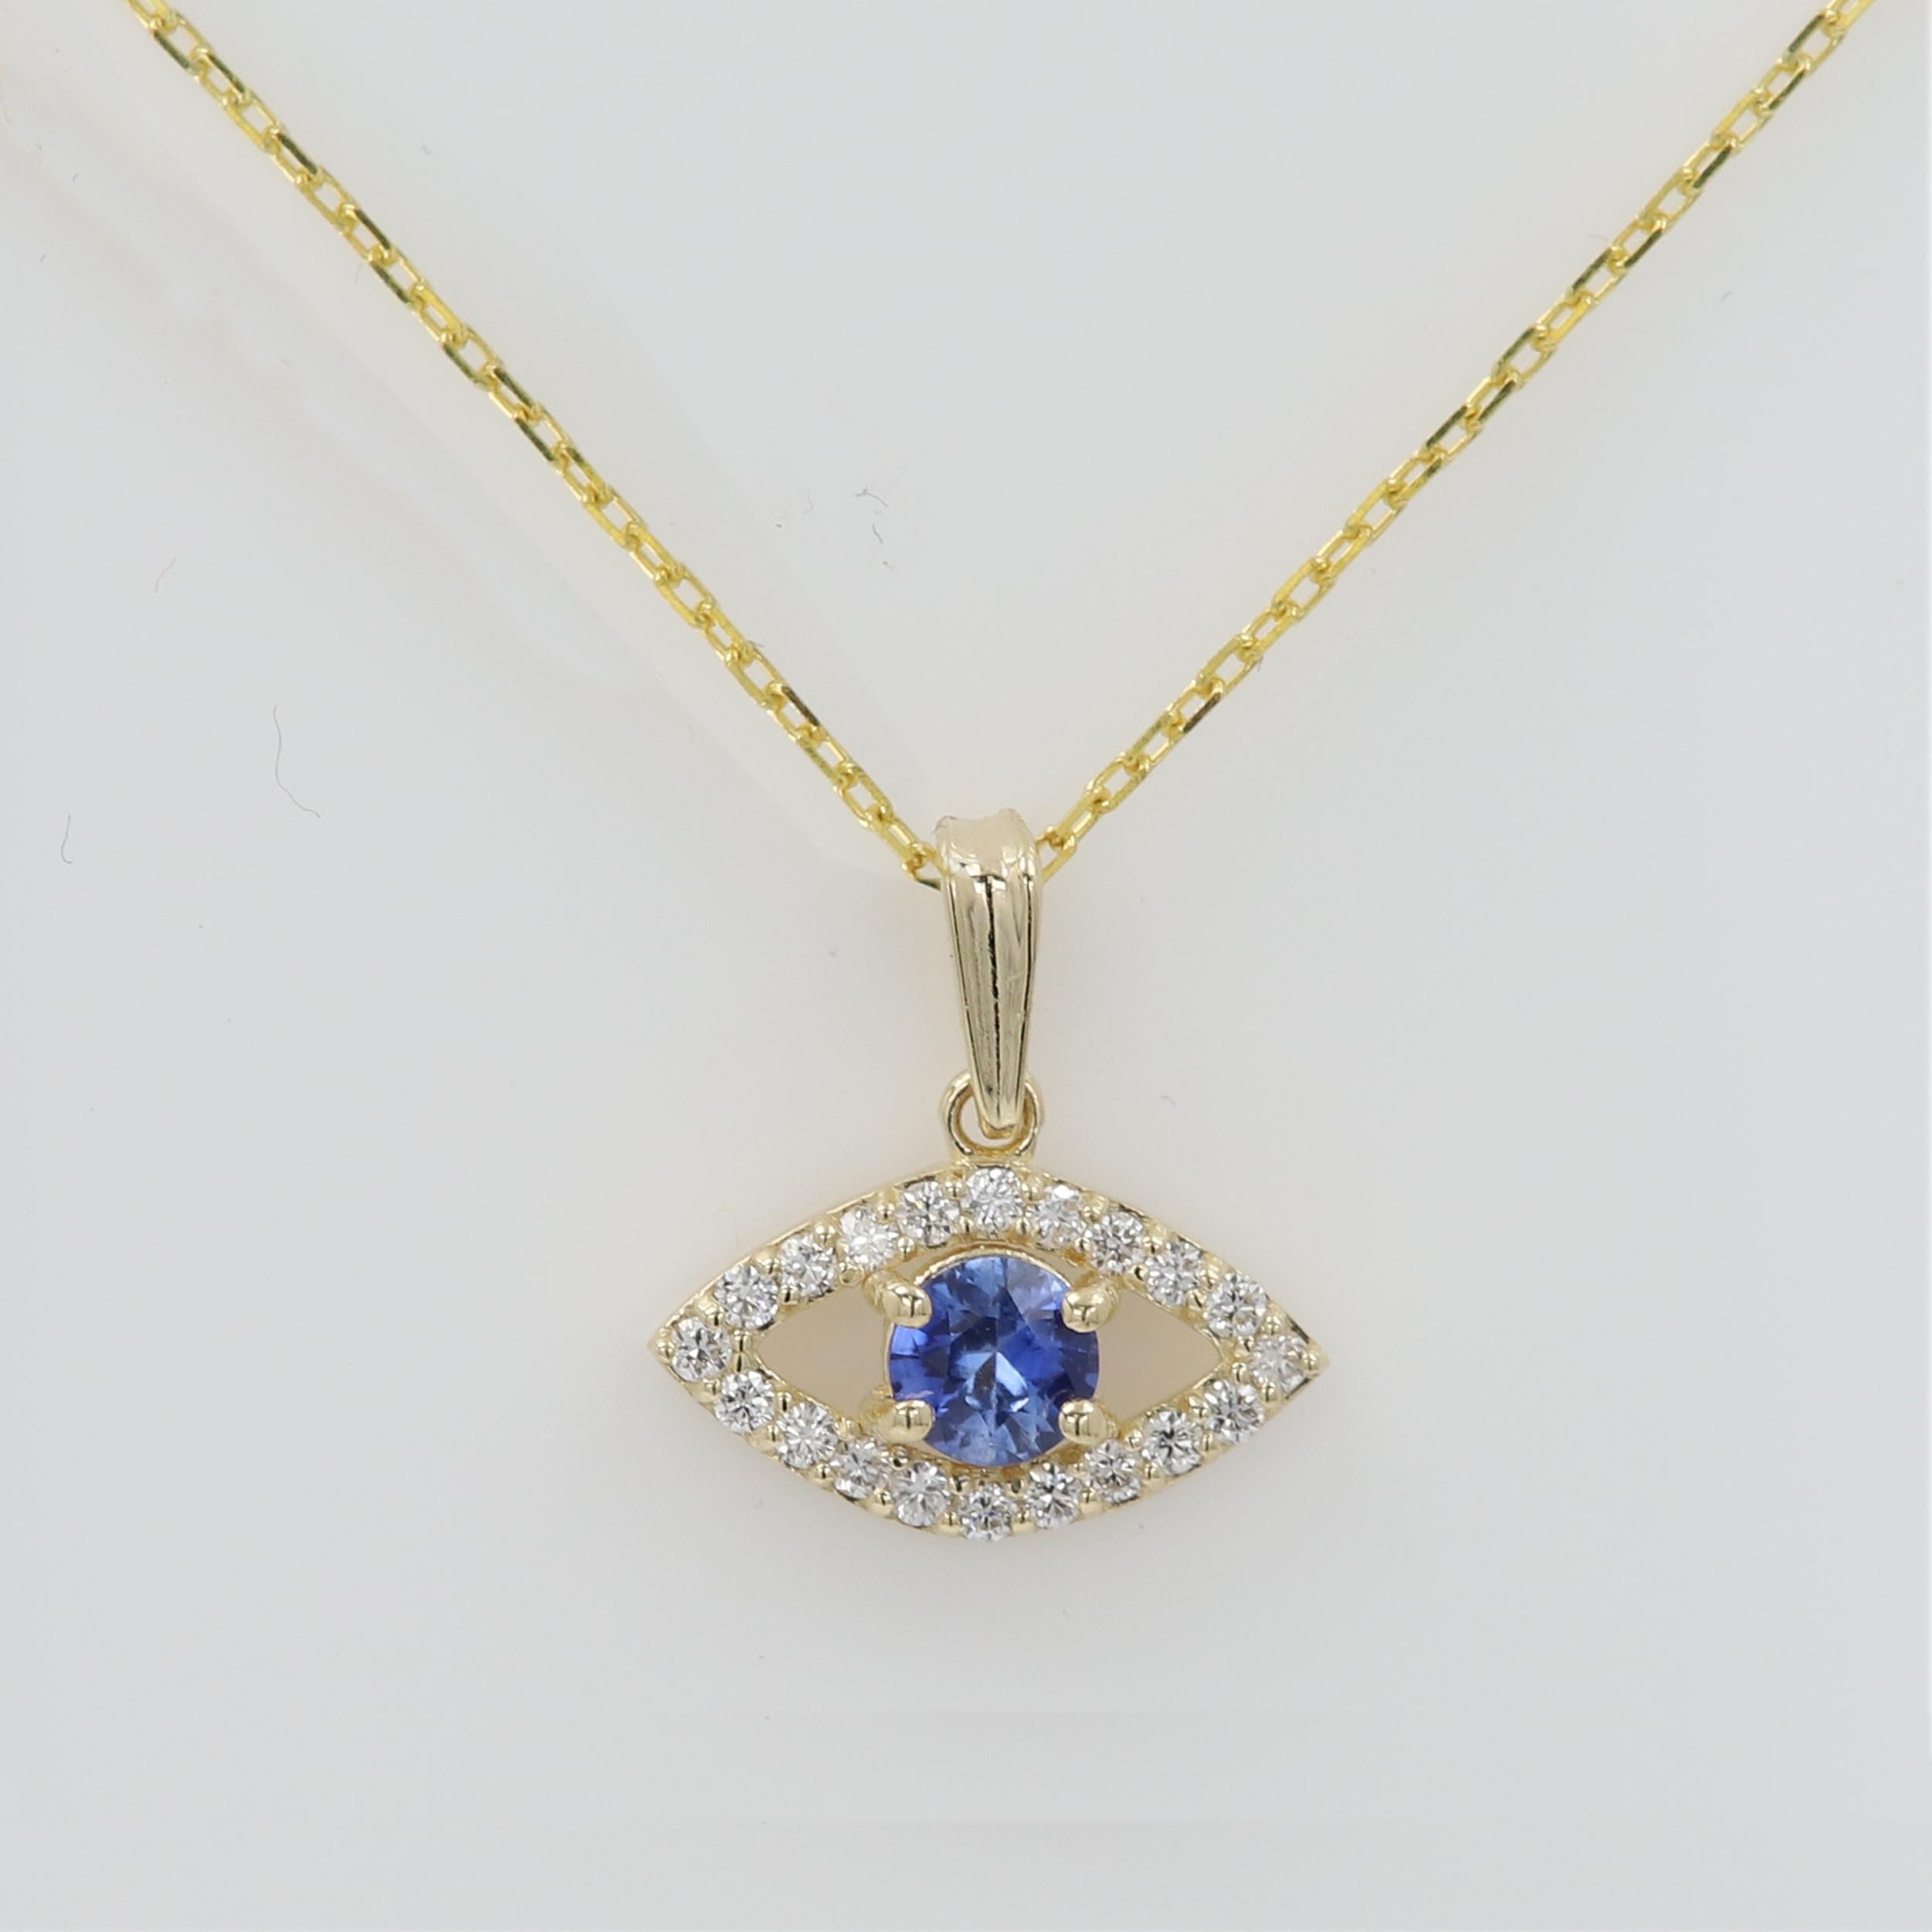 Brilliant Cute Mini Gold Evil Eye Pendant

Natural Diamonds and Blue Sapphire
14k Yellow Gold  0.50 grams (without the chain)
Made with very Shiny quality diamonds G-F-VS approx 0.14 carat.

the small size makes it very cute and trendy.
Center 